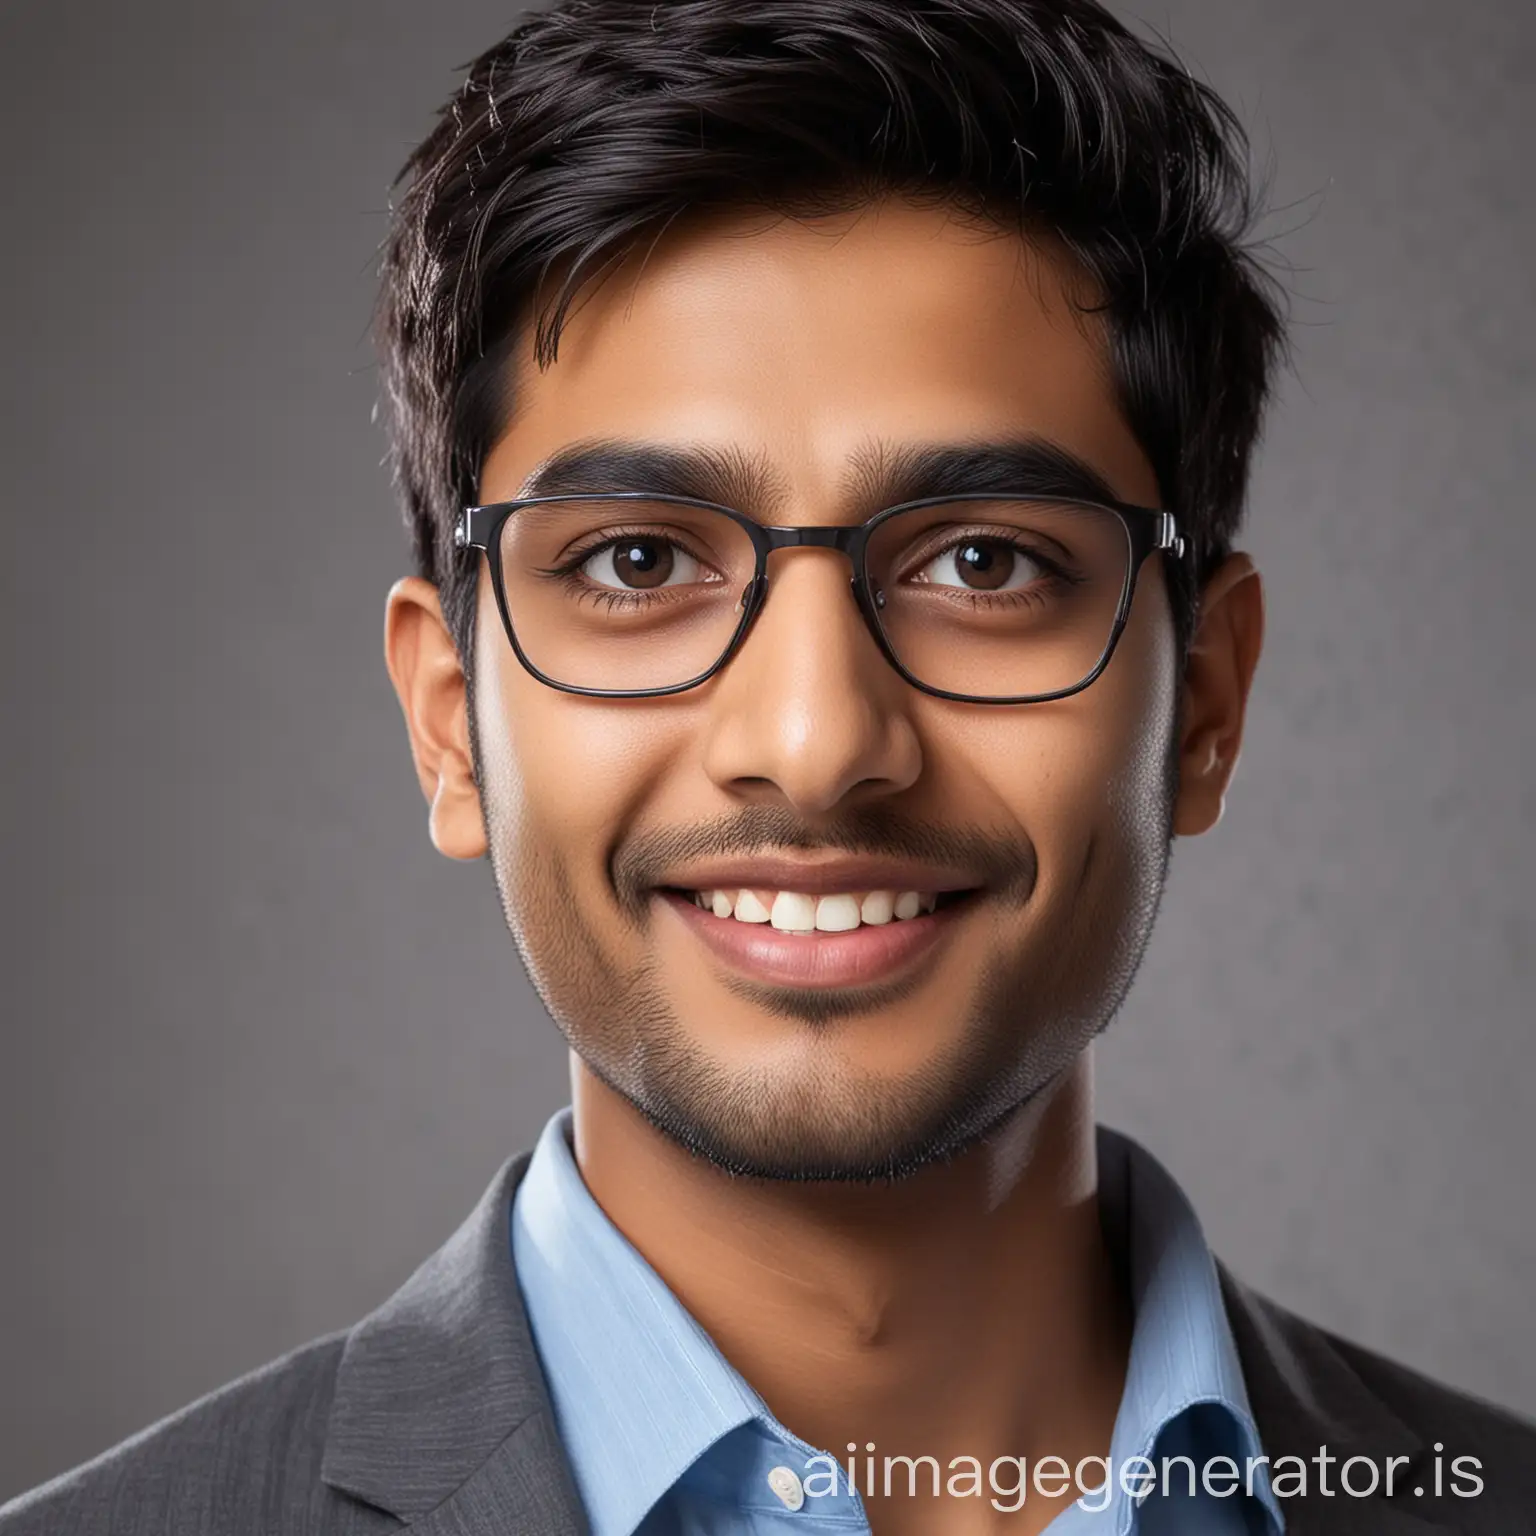 take this picture and make this picture into a professional picture of 28 years old Indian boy, which can be used for LinkedIn and other business areas. Put spectacle on the face as well.